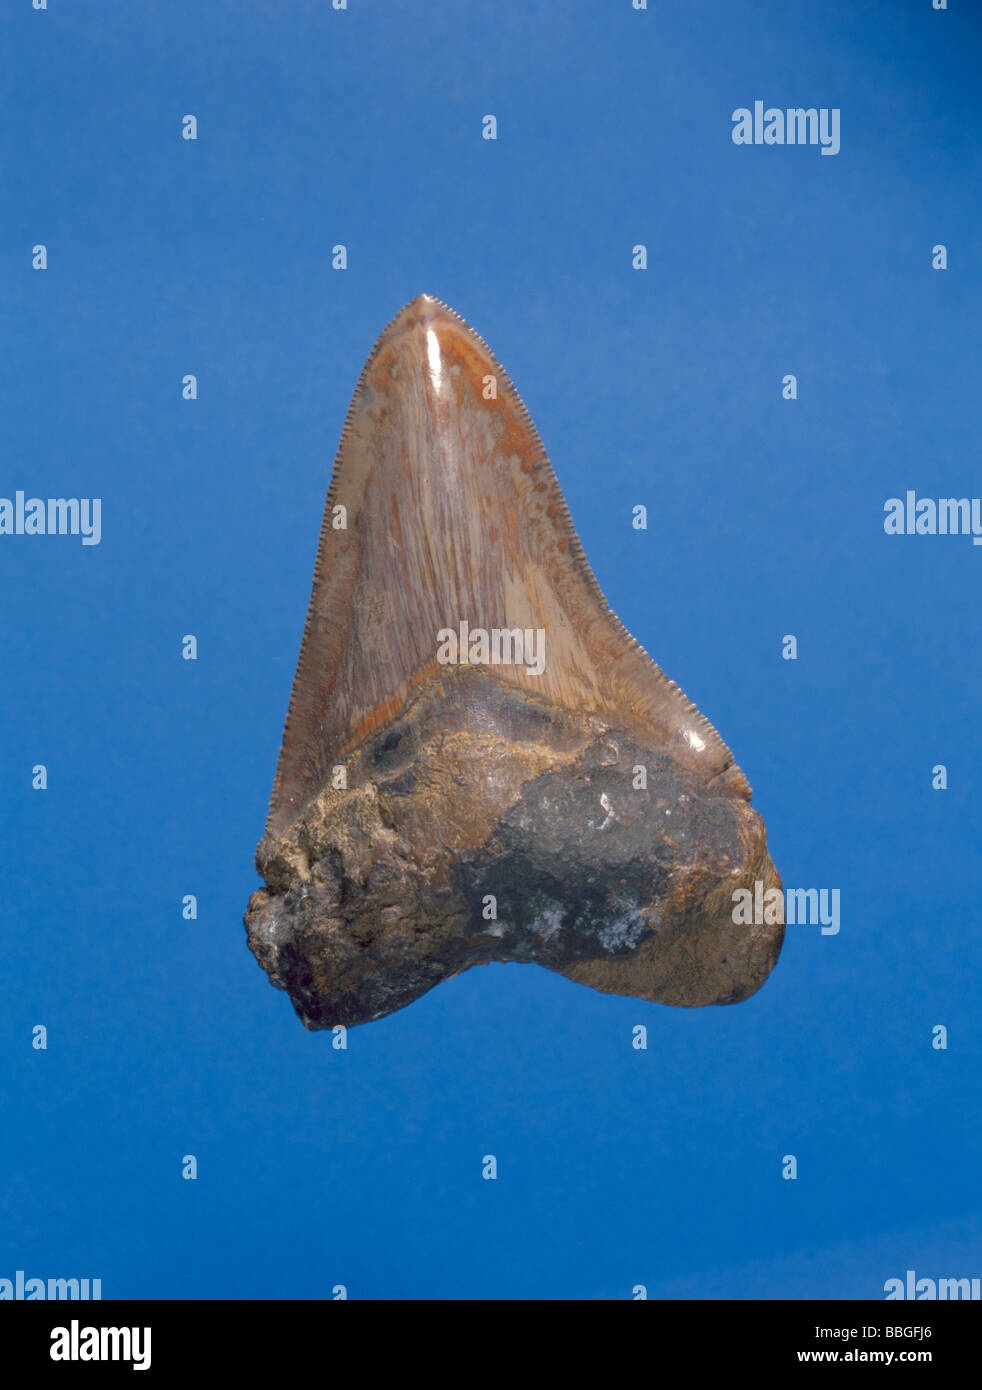 Fossil shark tooth (Carcharadon megalodon) from Pliocene period, Orford, Suffolk, England, UK. Length 42mm . Stock Photo